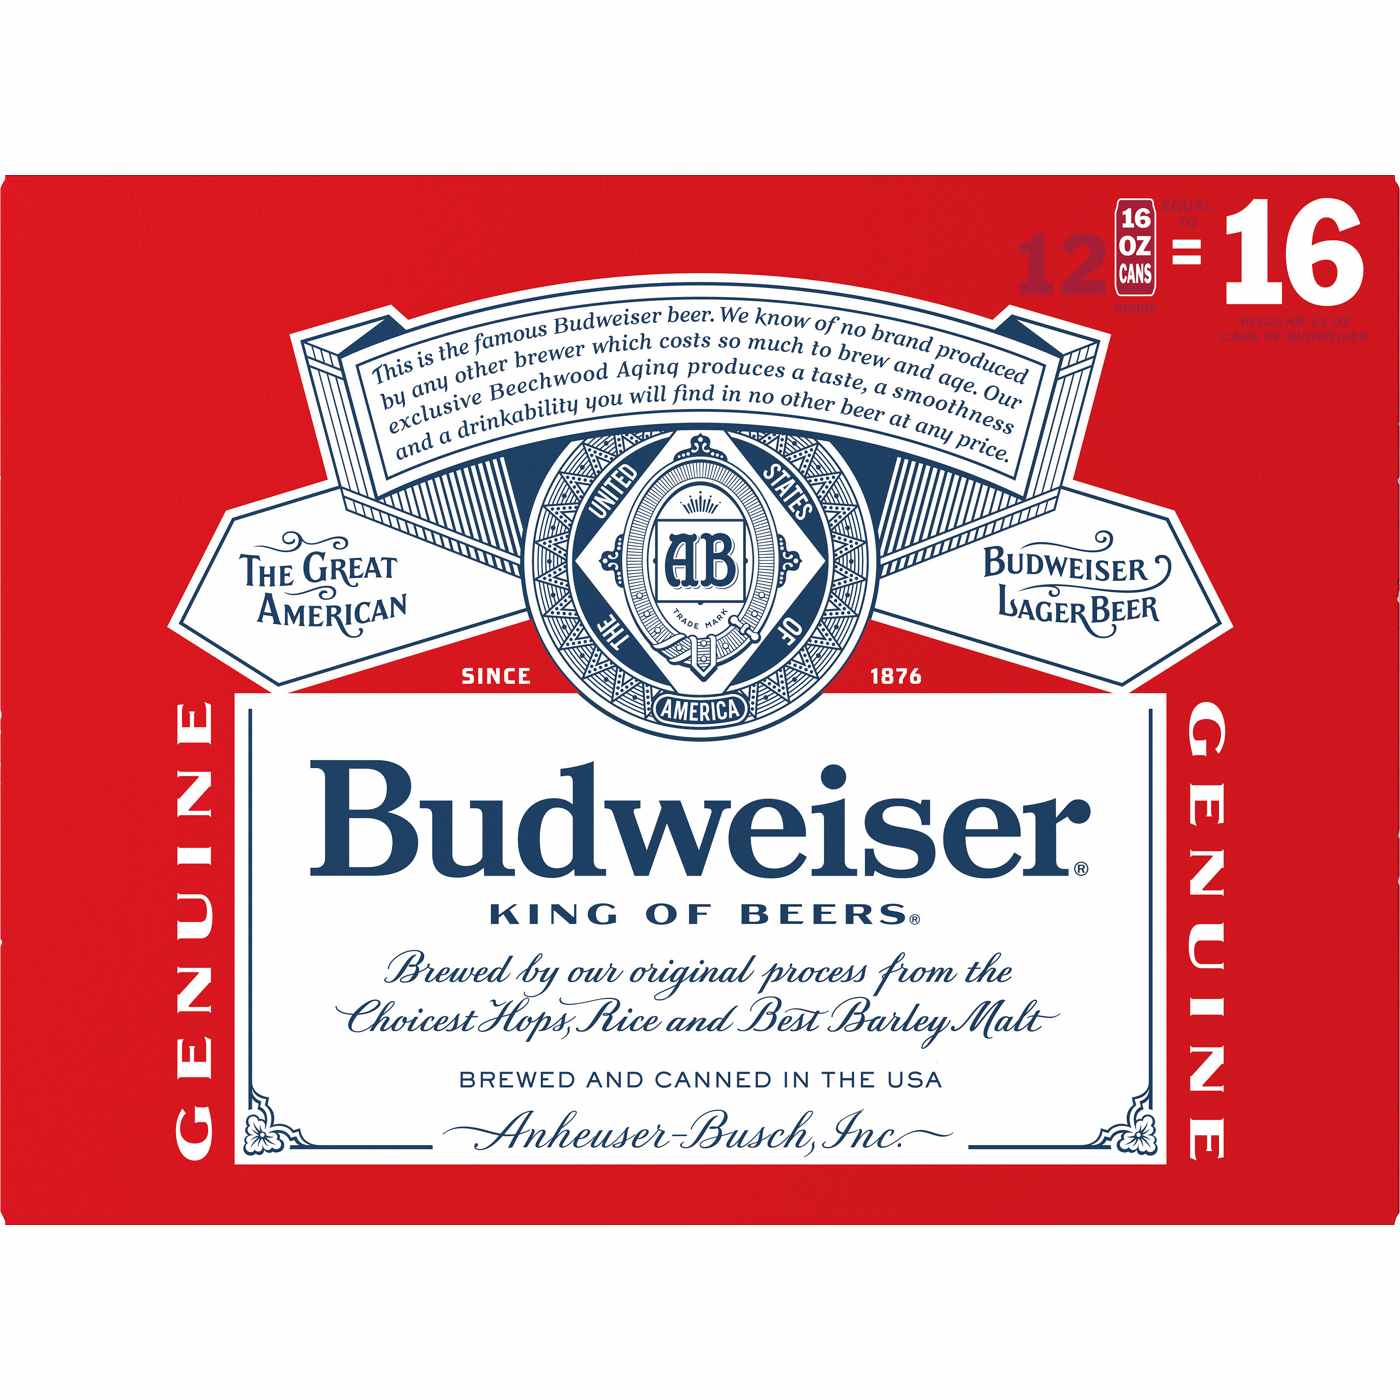 Budweiser Beer 16 oz Cans; image 2 of 2